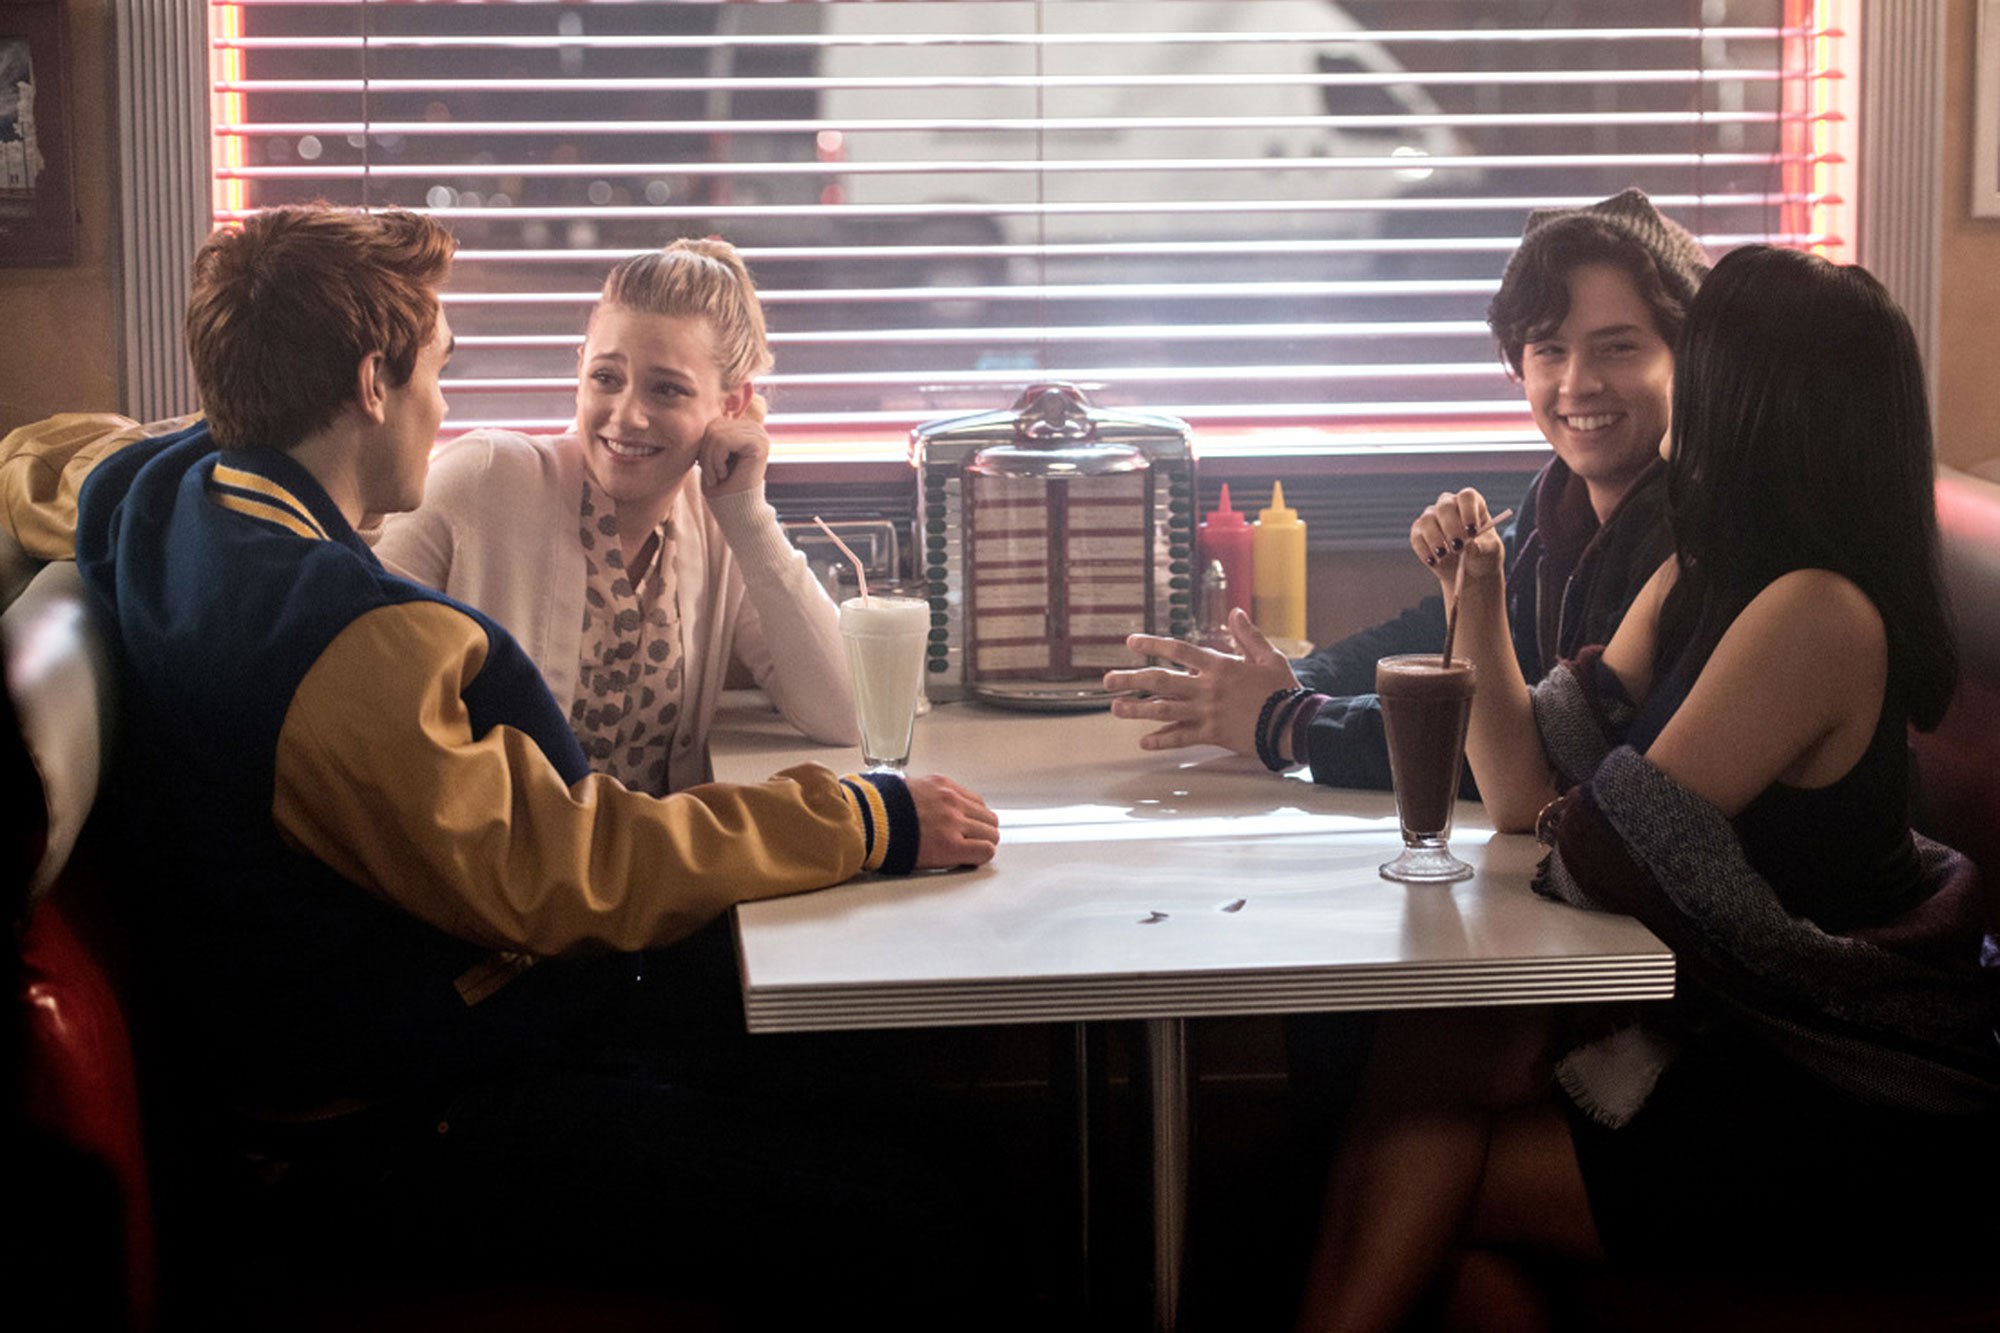 The “Archie” Reboot with a “Twin Peaks” Twist